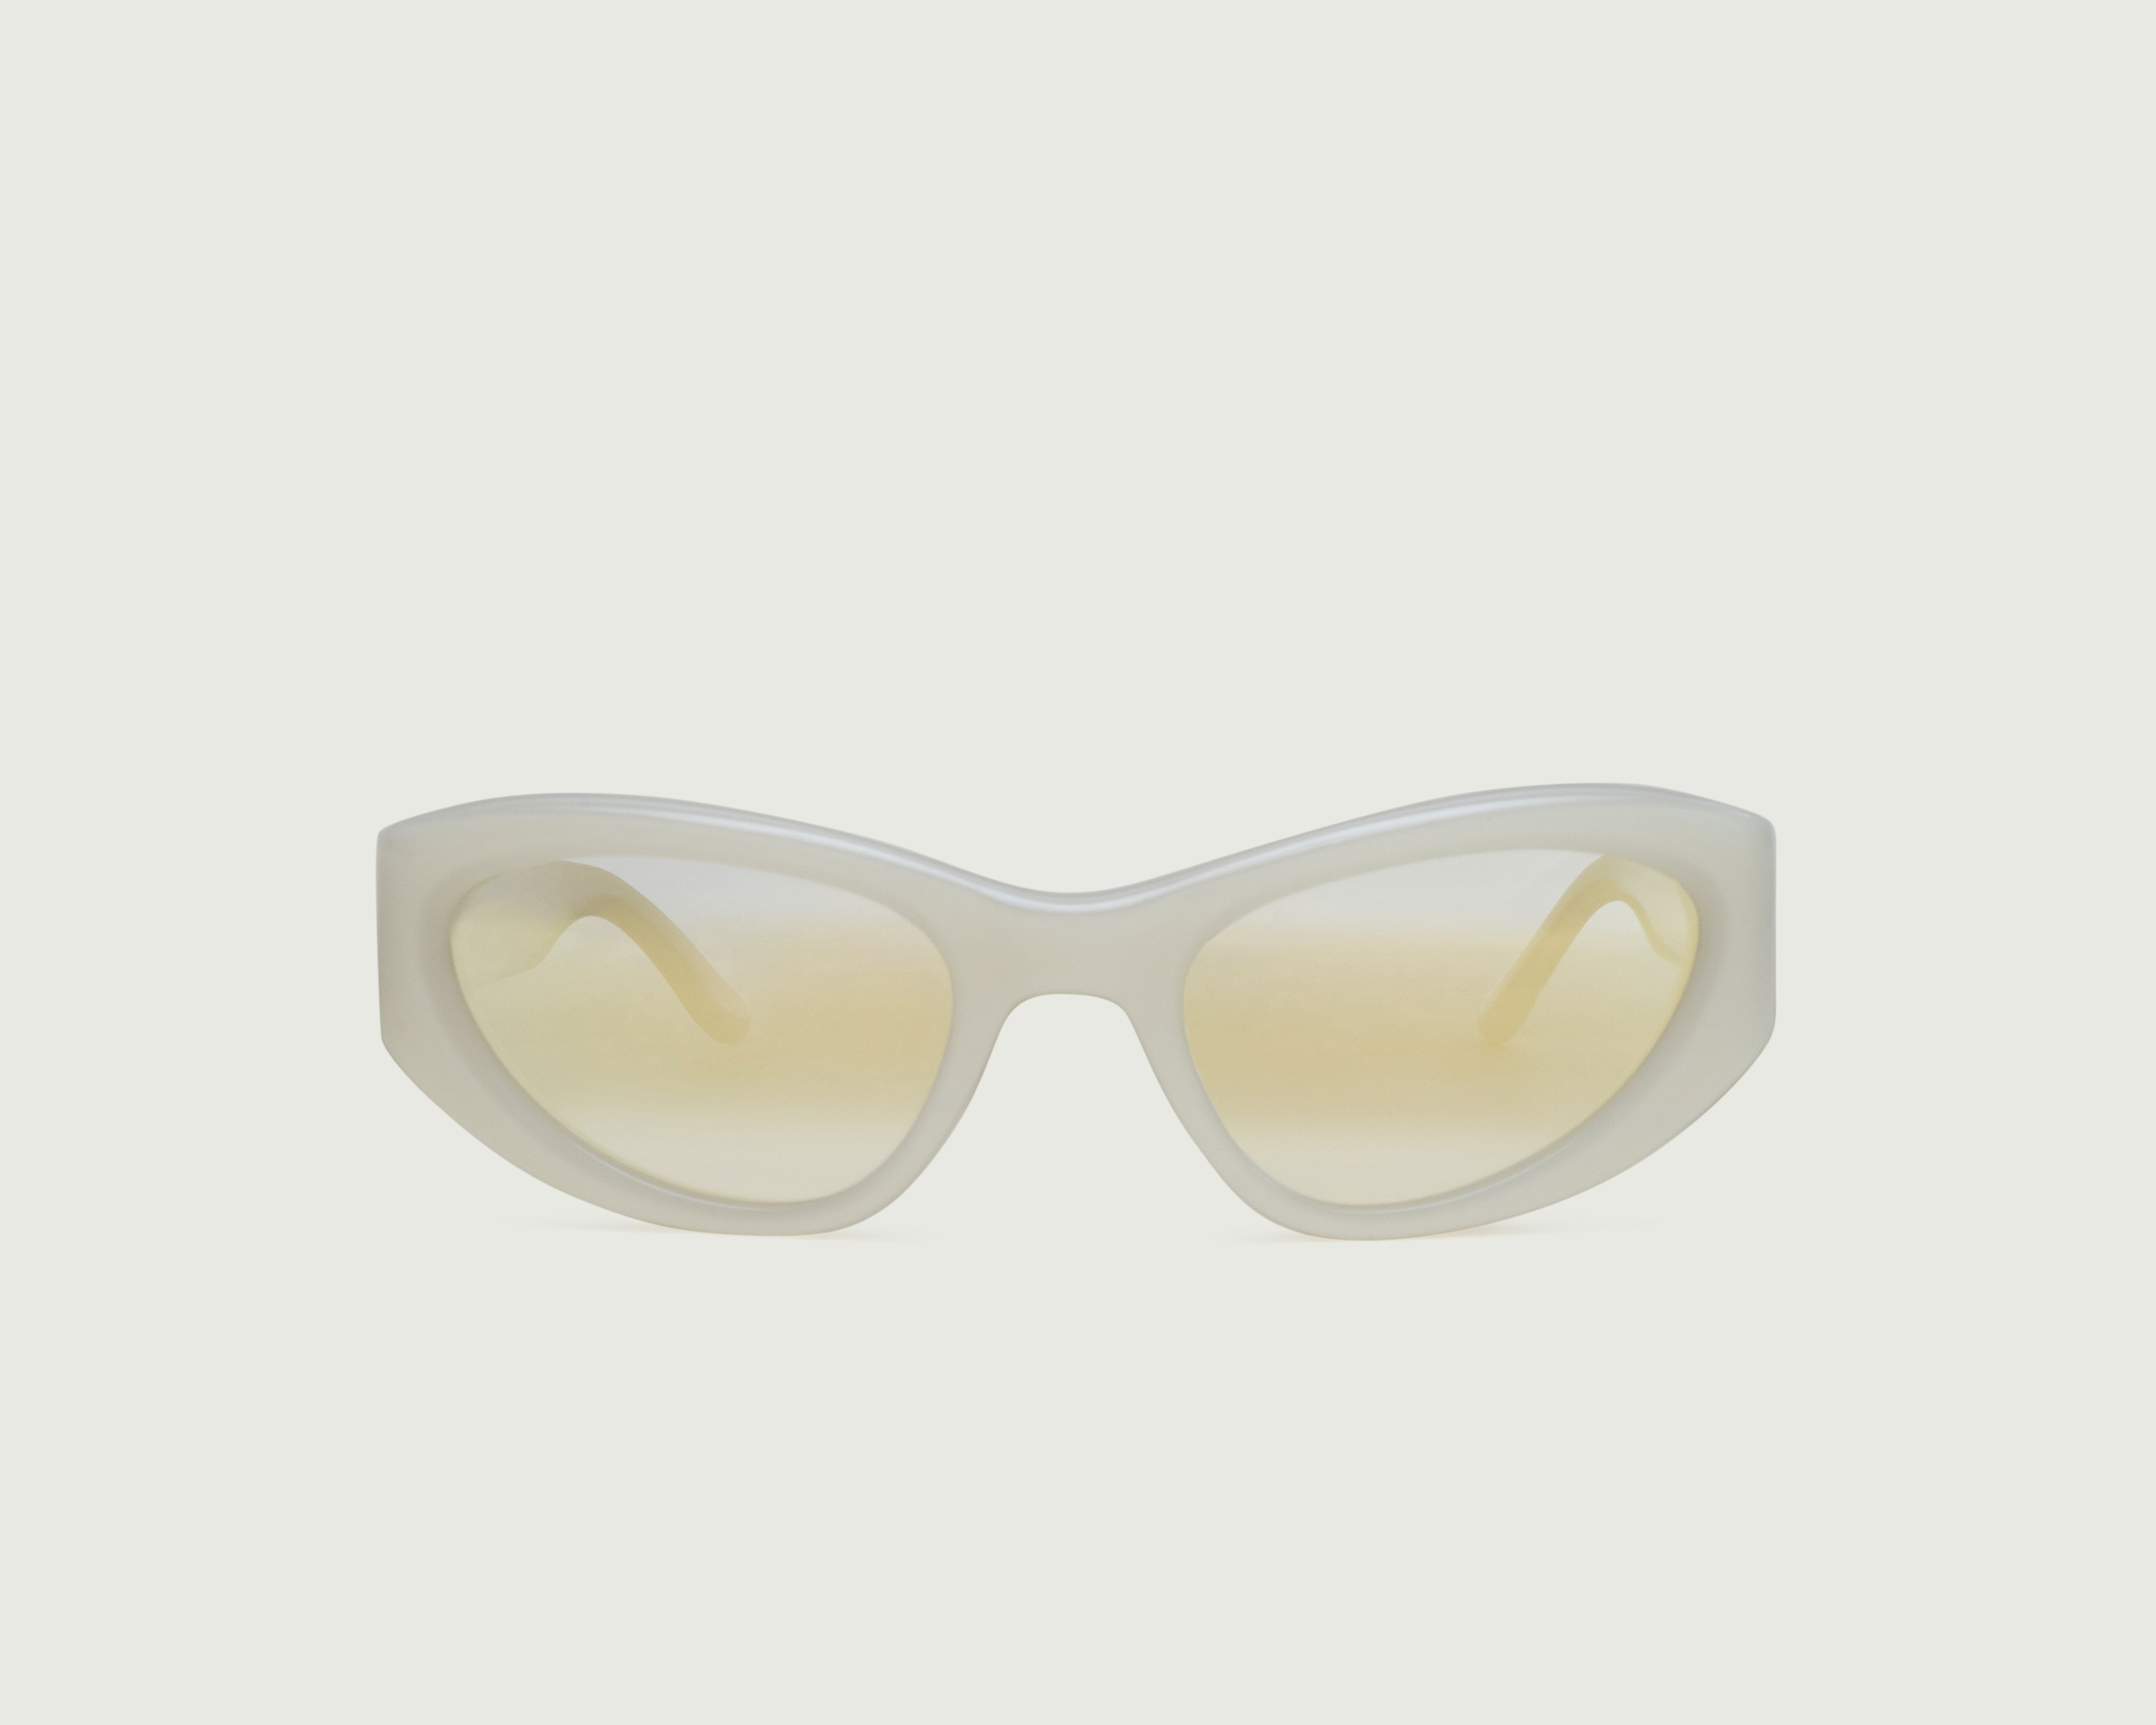 Moon::Sol Sunglasses cateye white acetate front